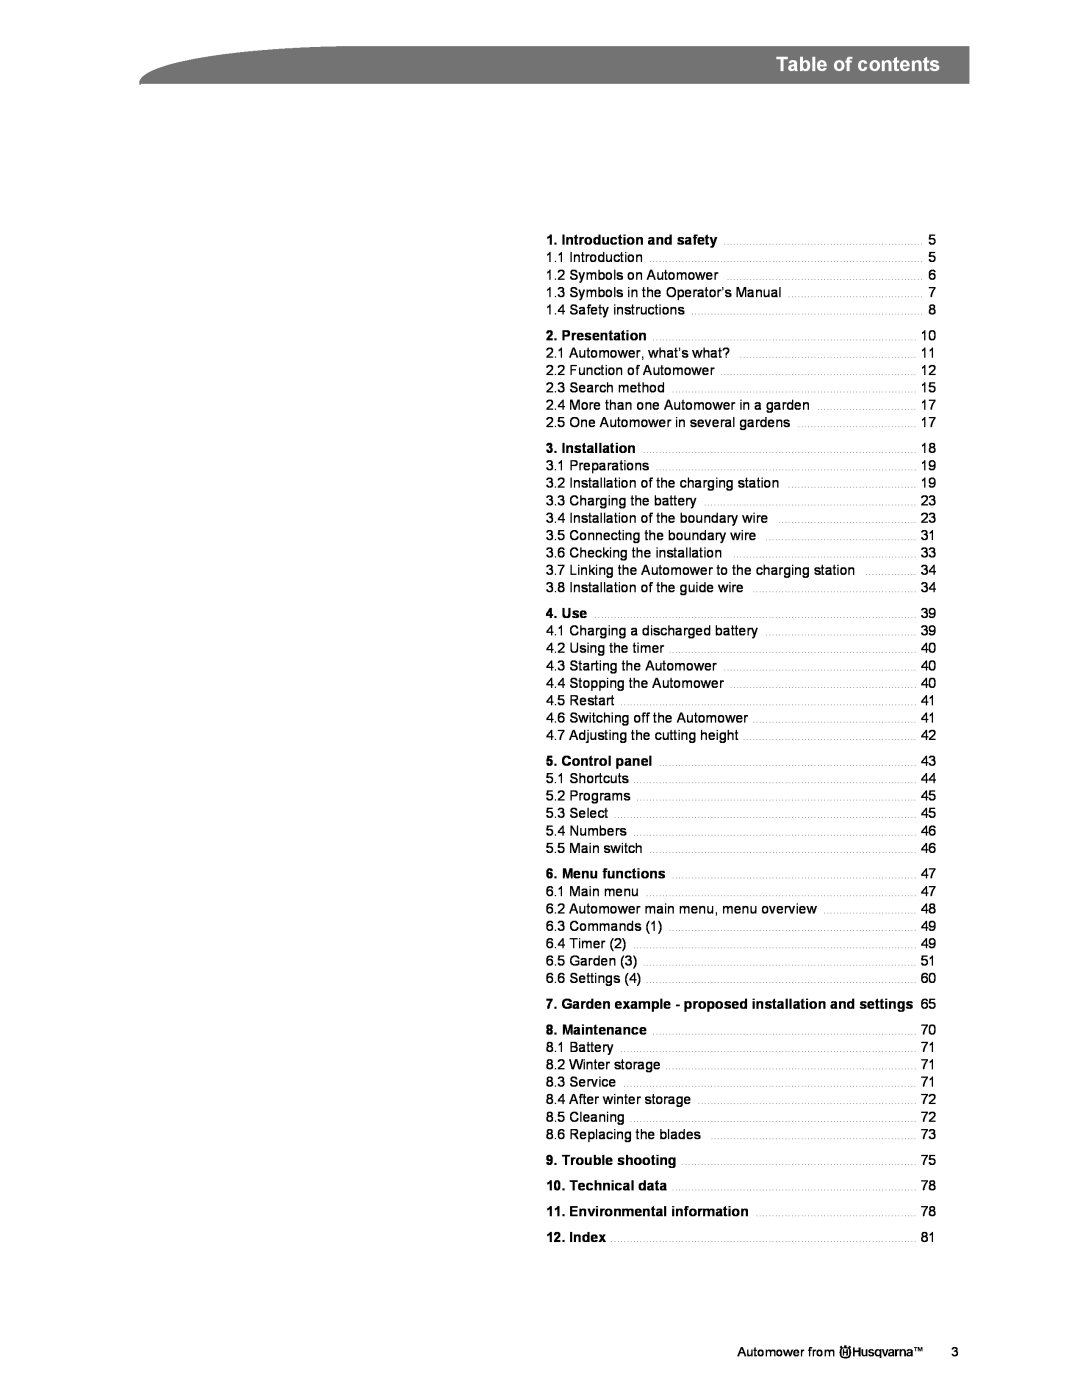 Husqvarna manual Table of contents, More than one Automower in a garden, Linking the Automower to the charging station 